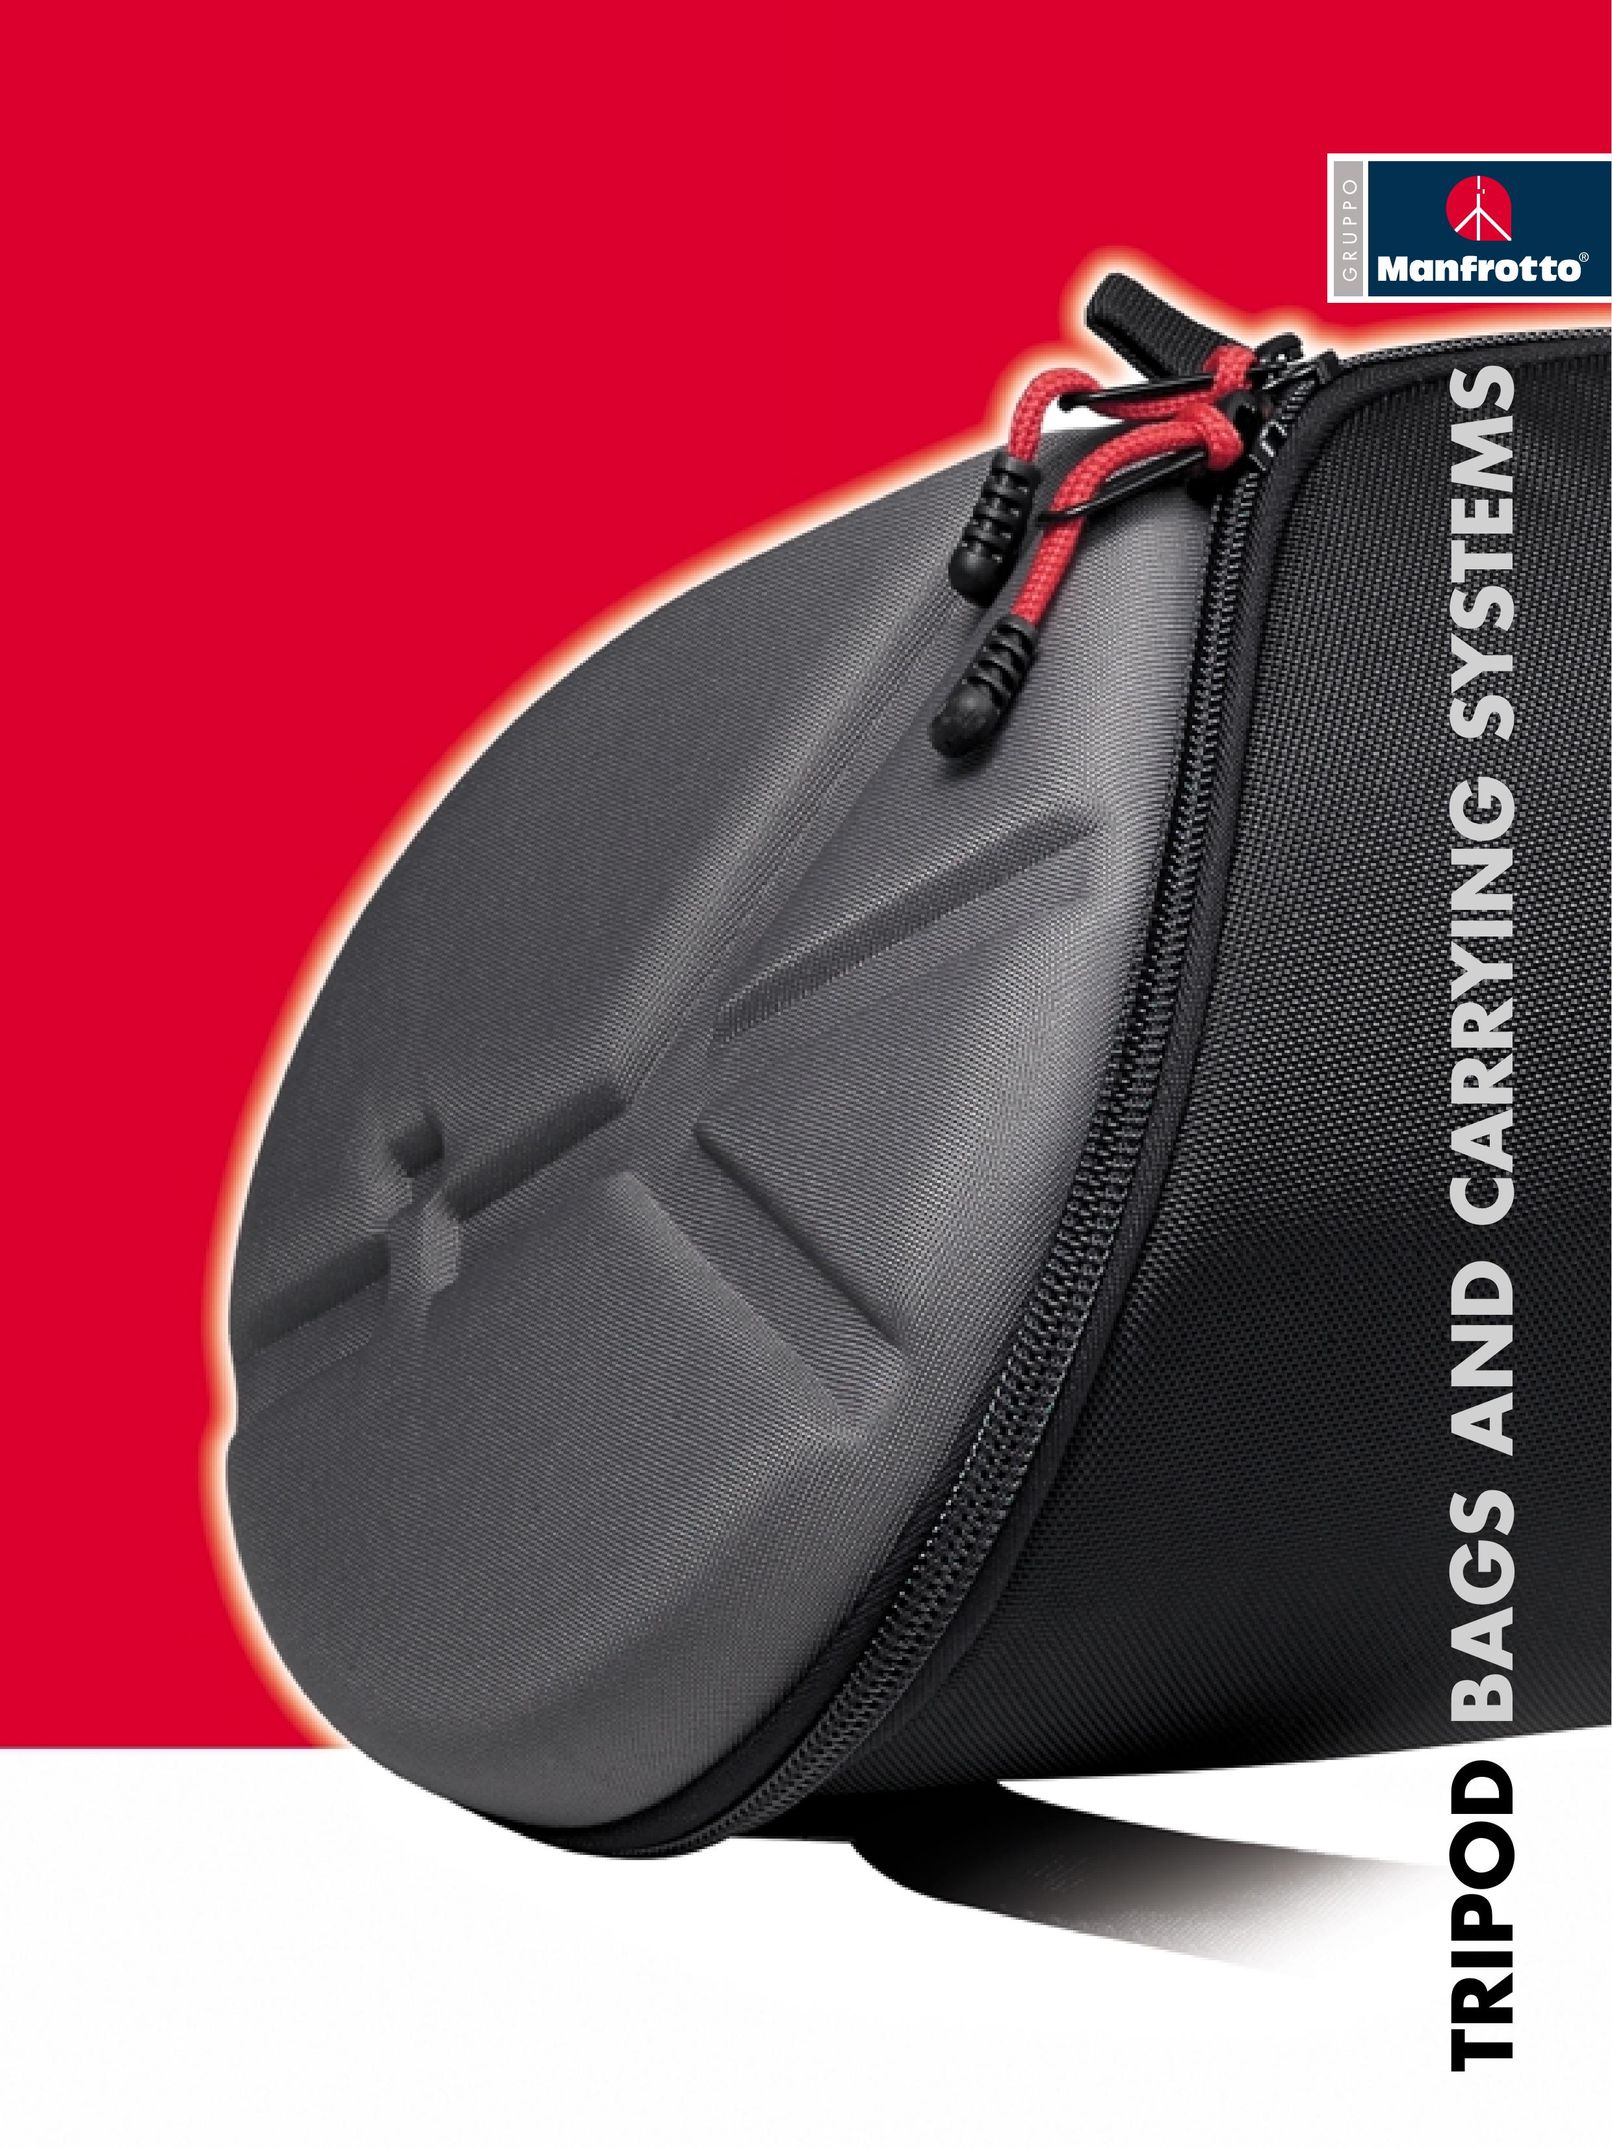 Manfrotto MBAG90P Carrying Case User Manual